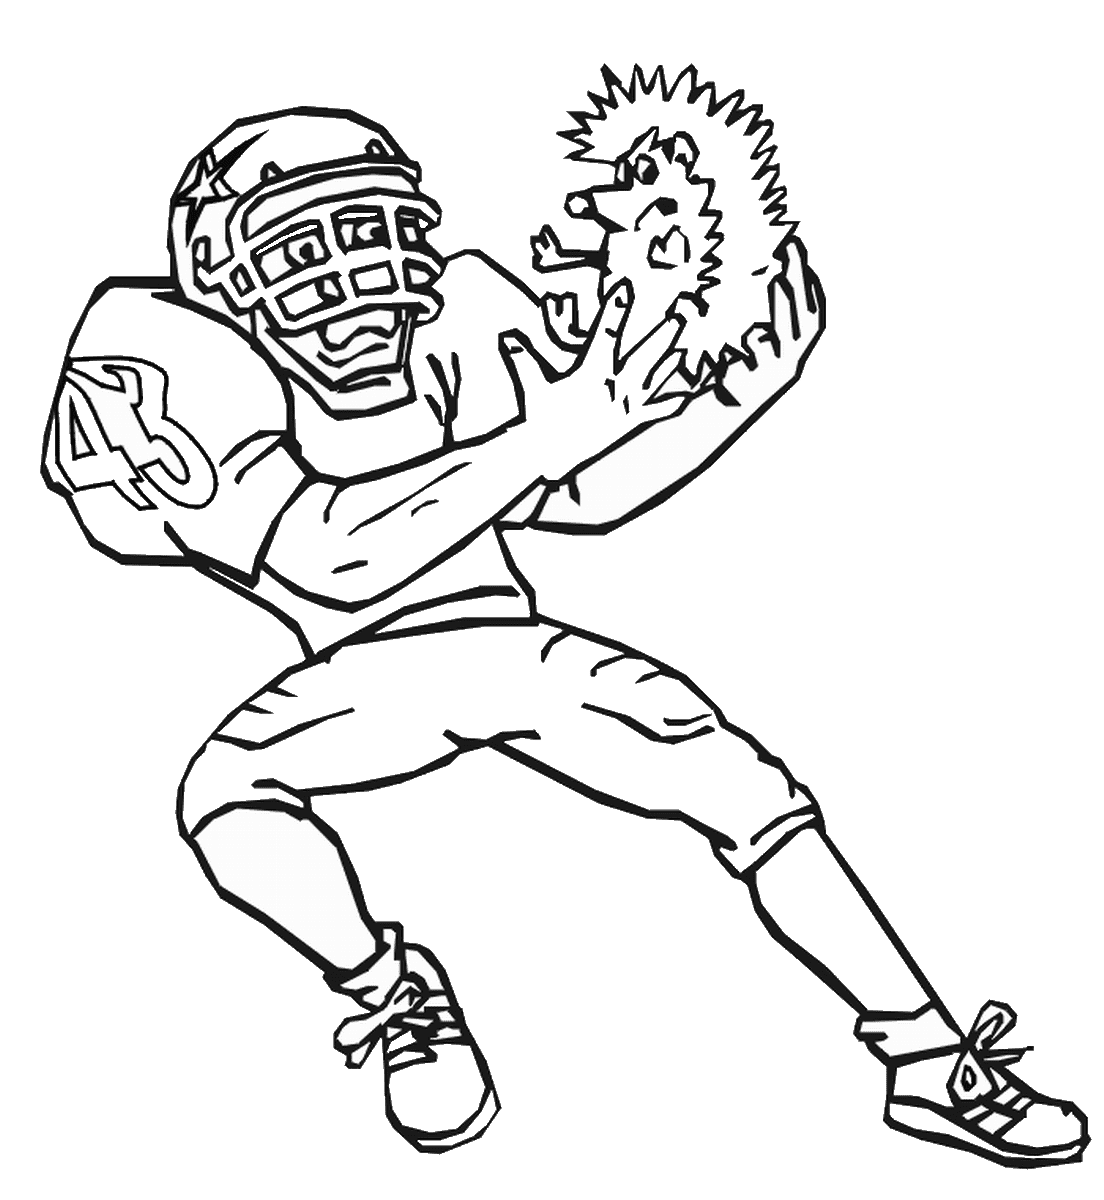 Printable Football Player Coloring Page Free Printable Coloring Pages